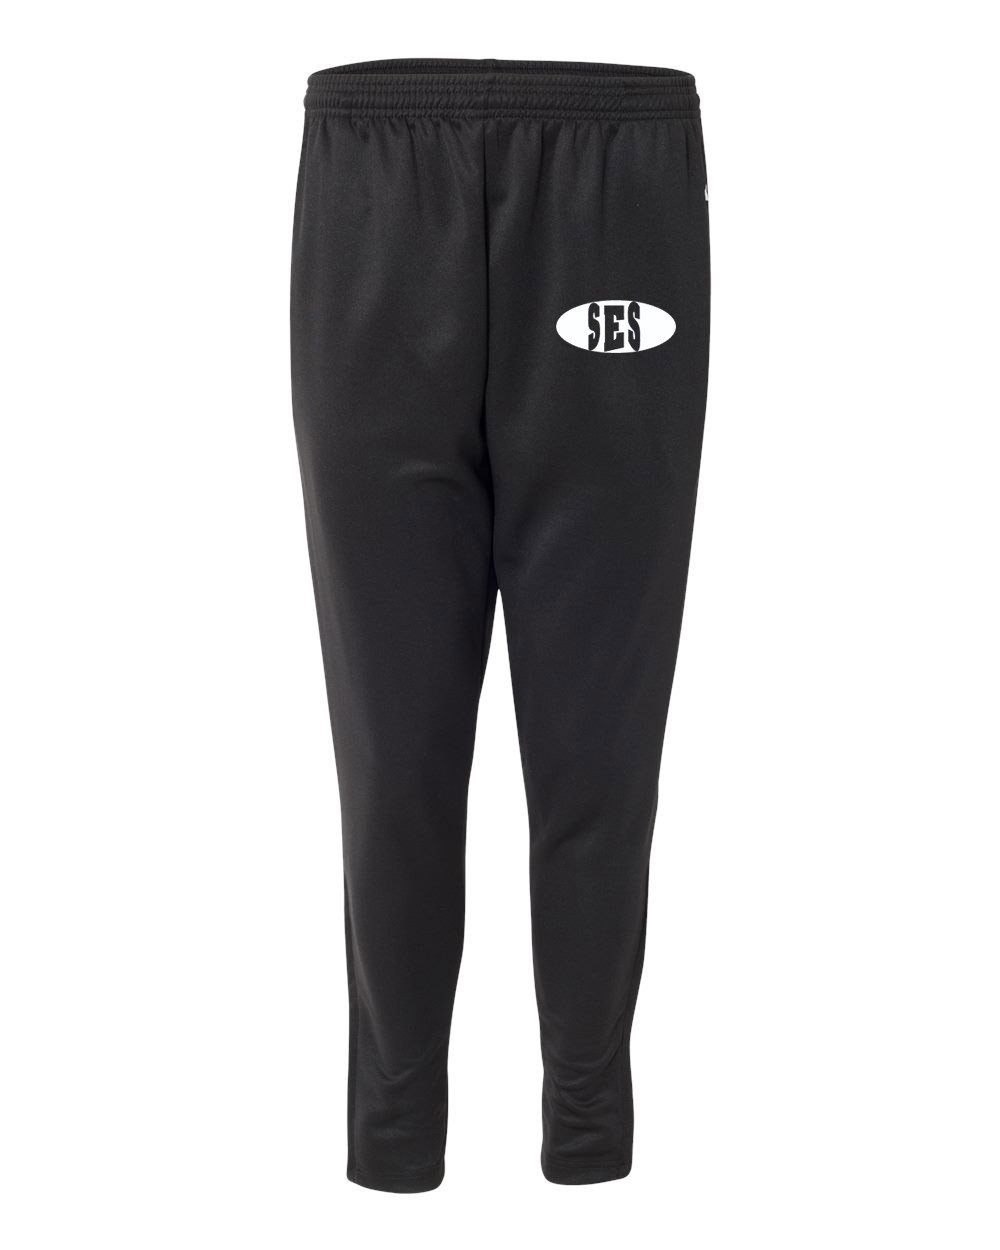 SES Spirit Trainer Pants w/ Logo - Please Allow 2-3 Weeks for Delivery